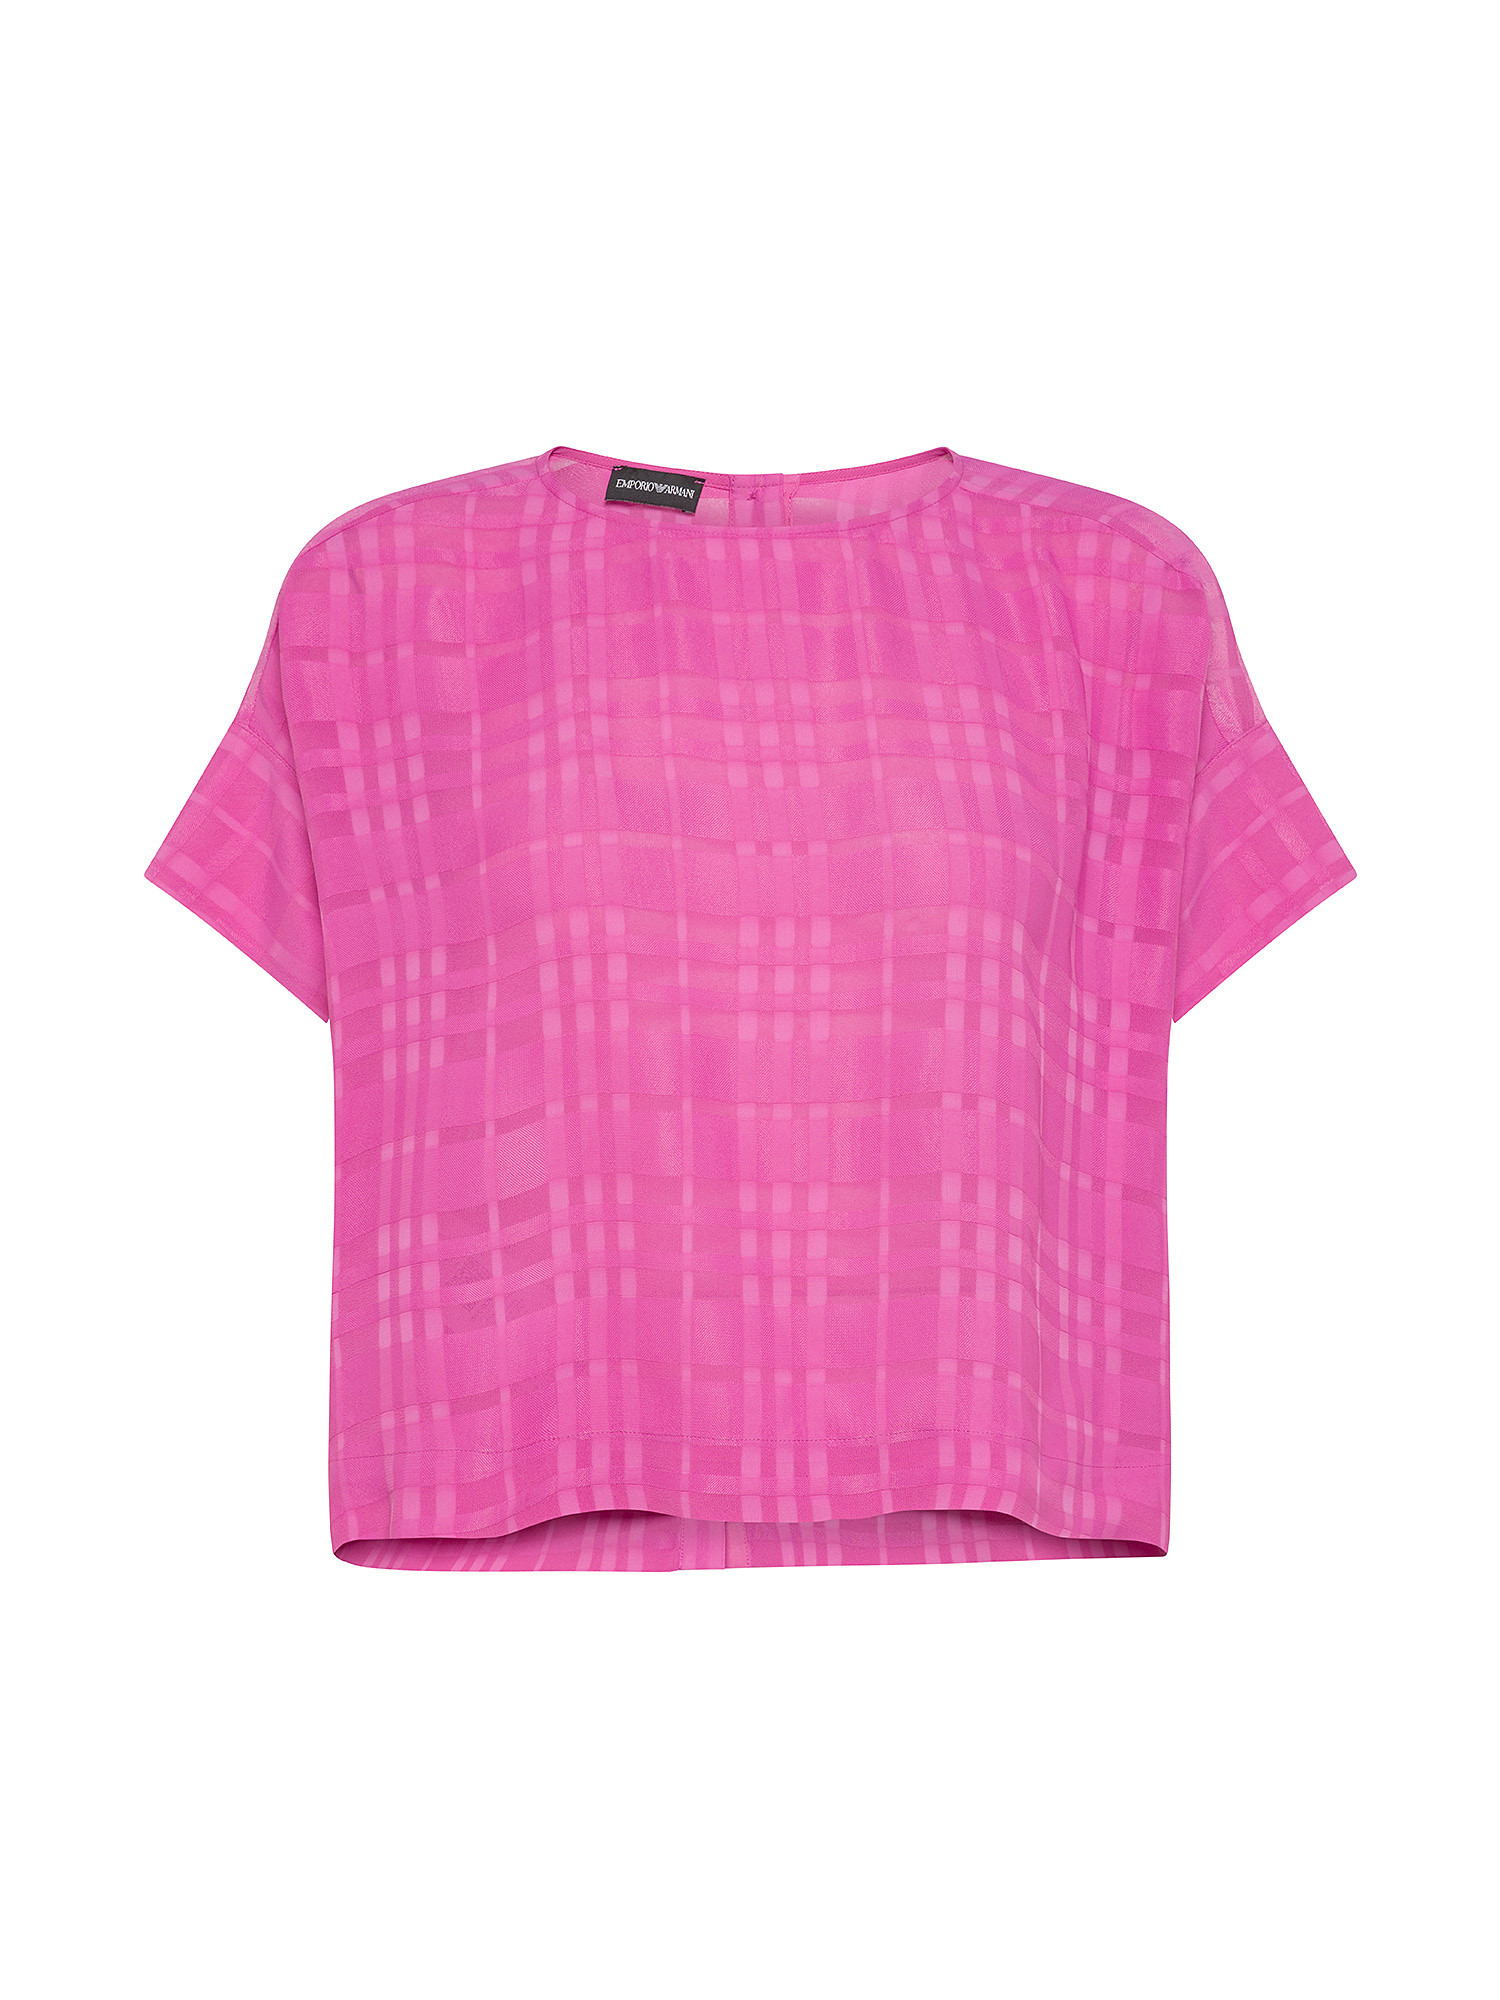 Emporio Armani - Patterned top, Pink Fuchsia, large image number 0